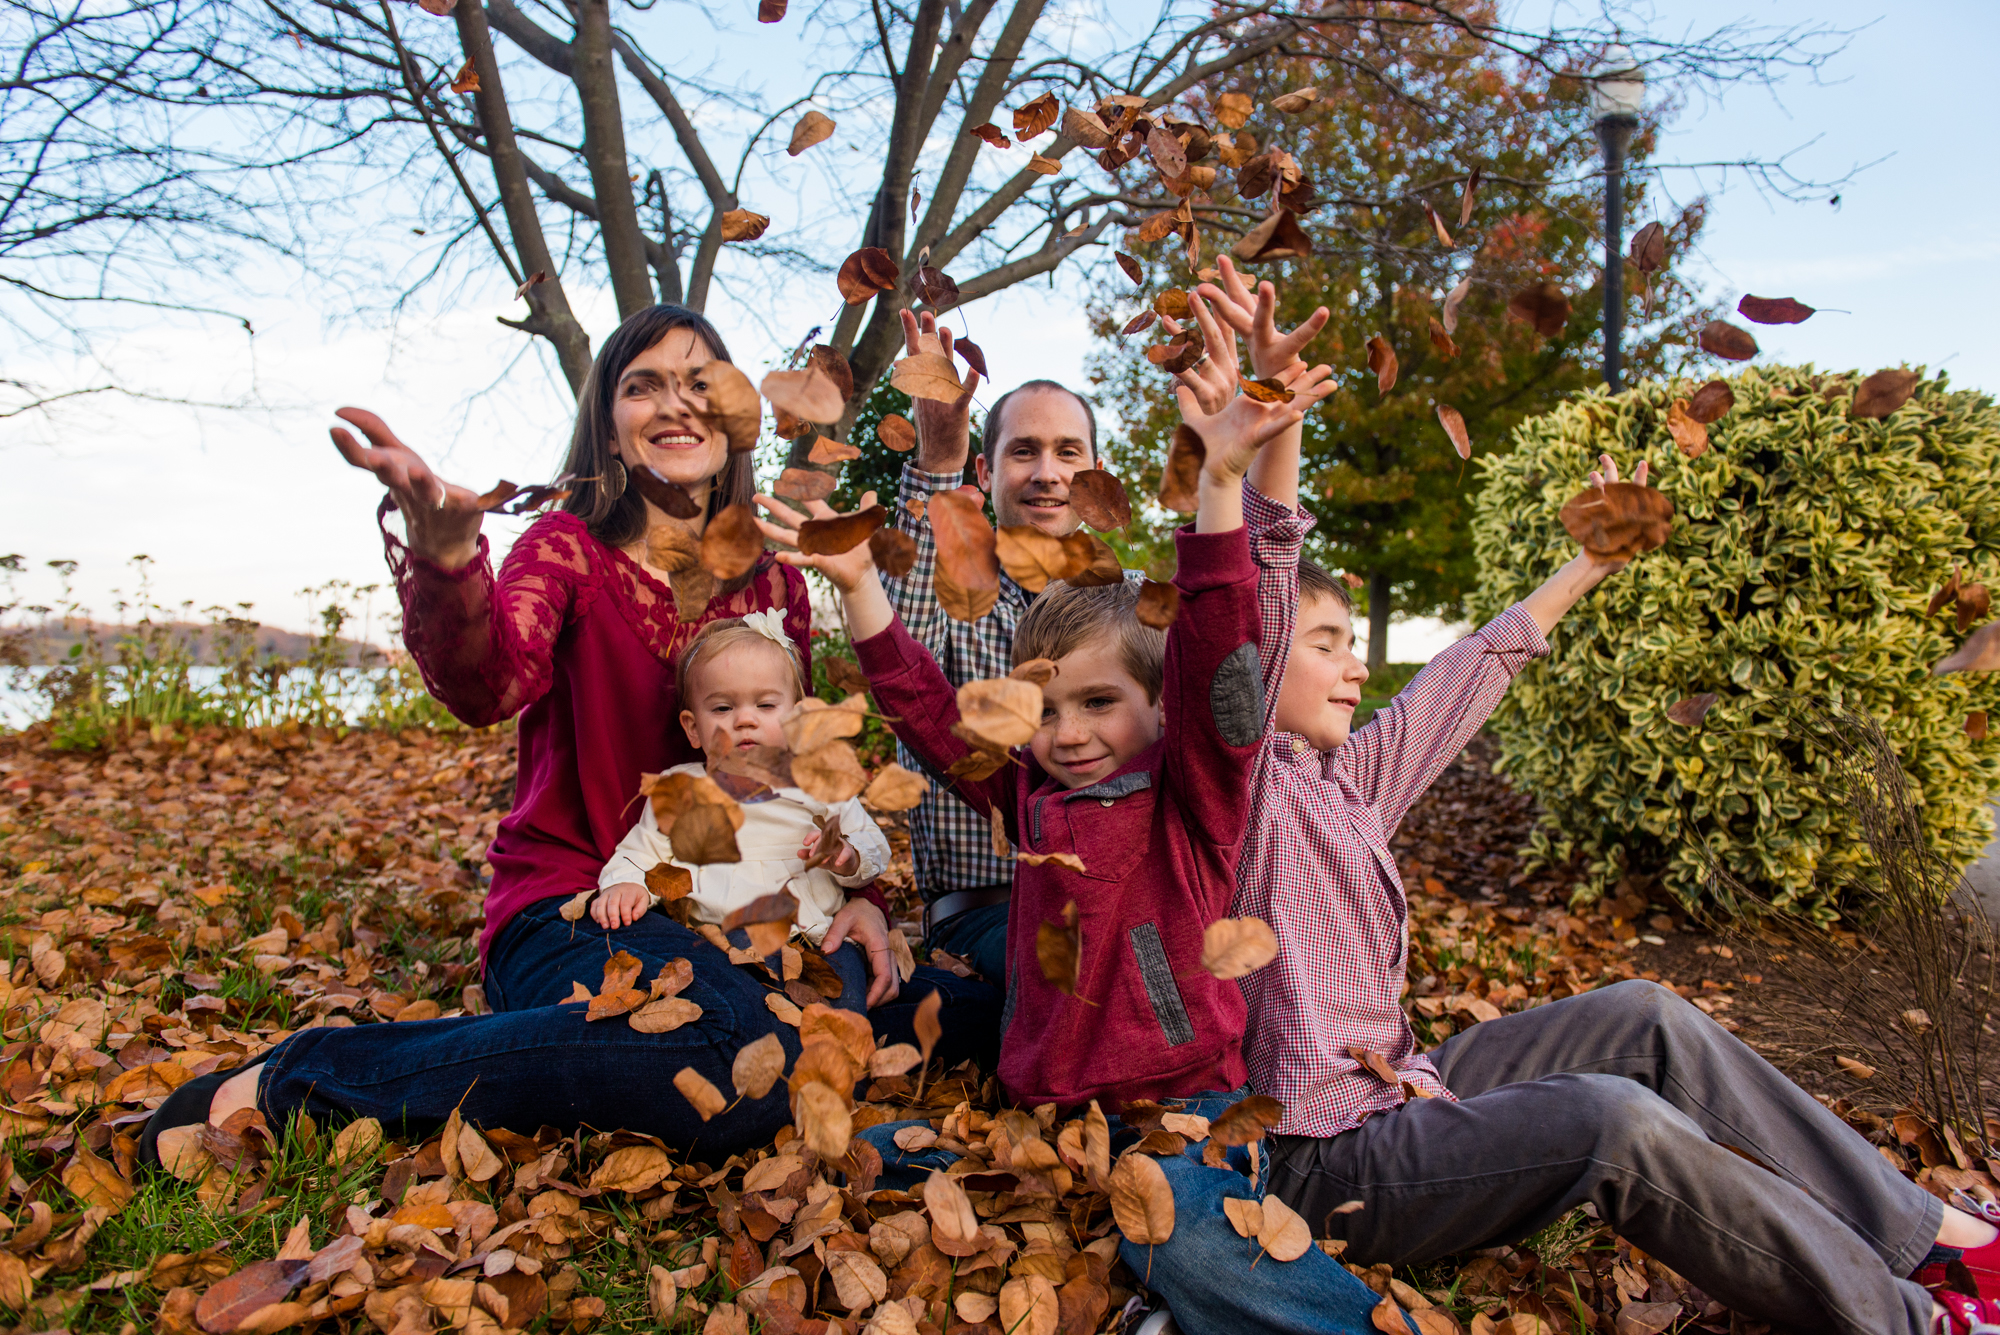 A family of 5 playing in the fall leaves